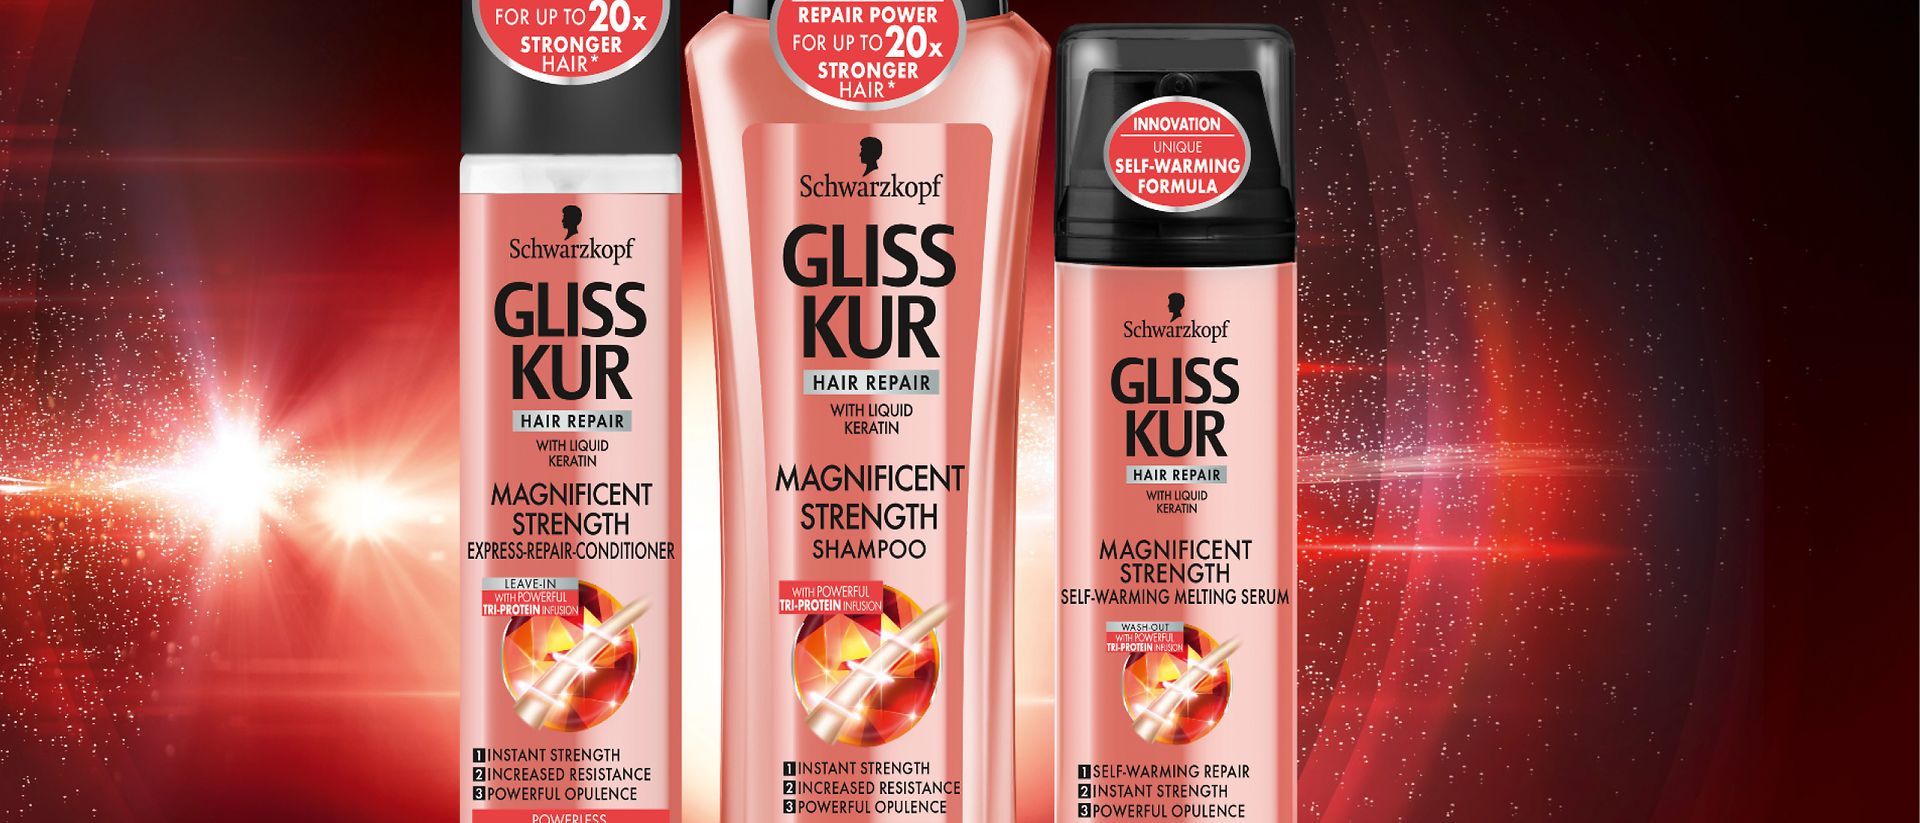 

Innovations Q2/2016: With the new product line Gliss Kur Magnificent Strength, the hair repair experts at Gliss Kur have filled a gap in the hair care market, offering a range specifically for lackluster, weakened hair.